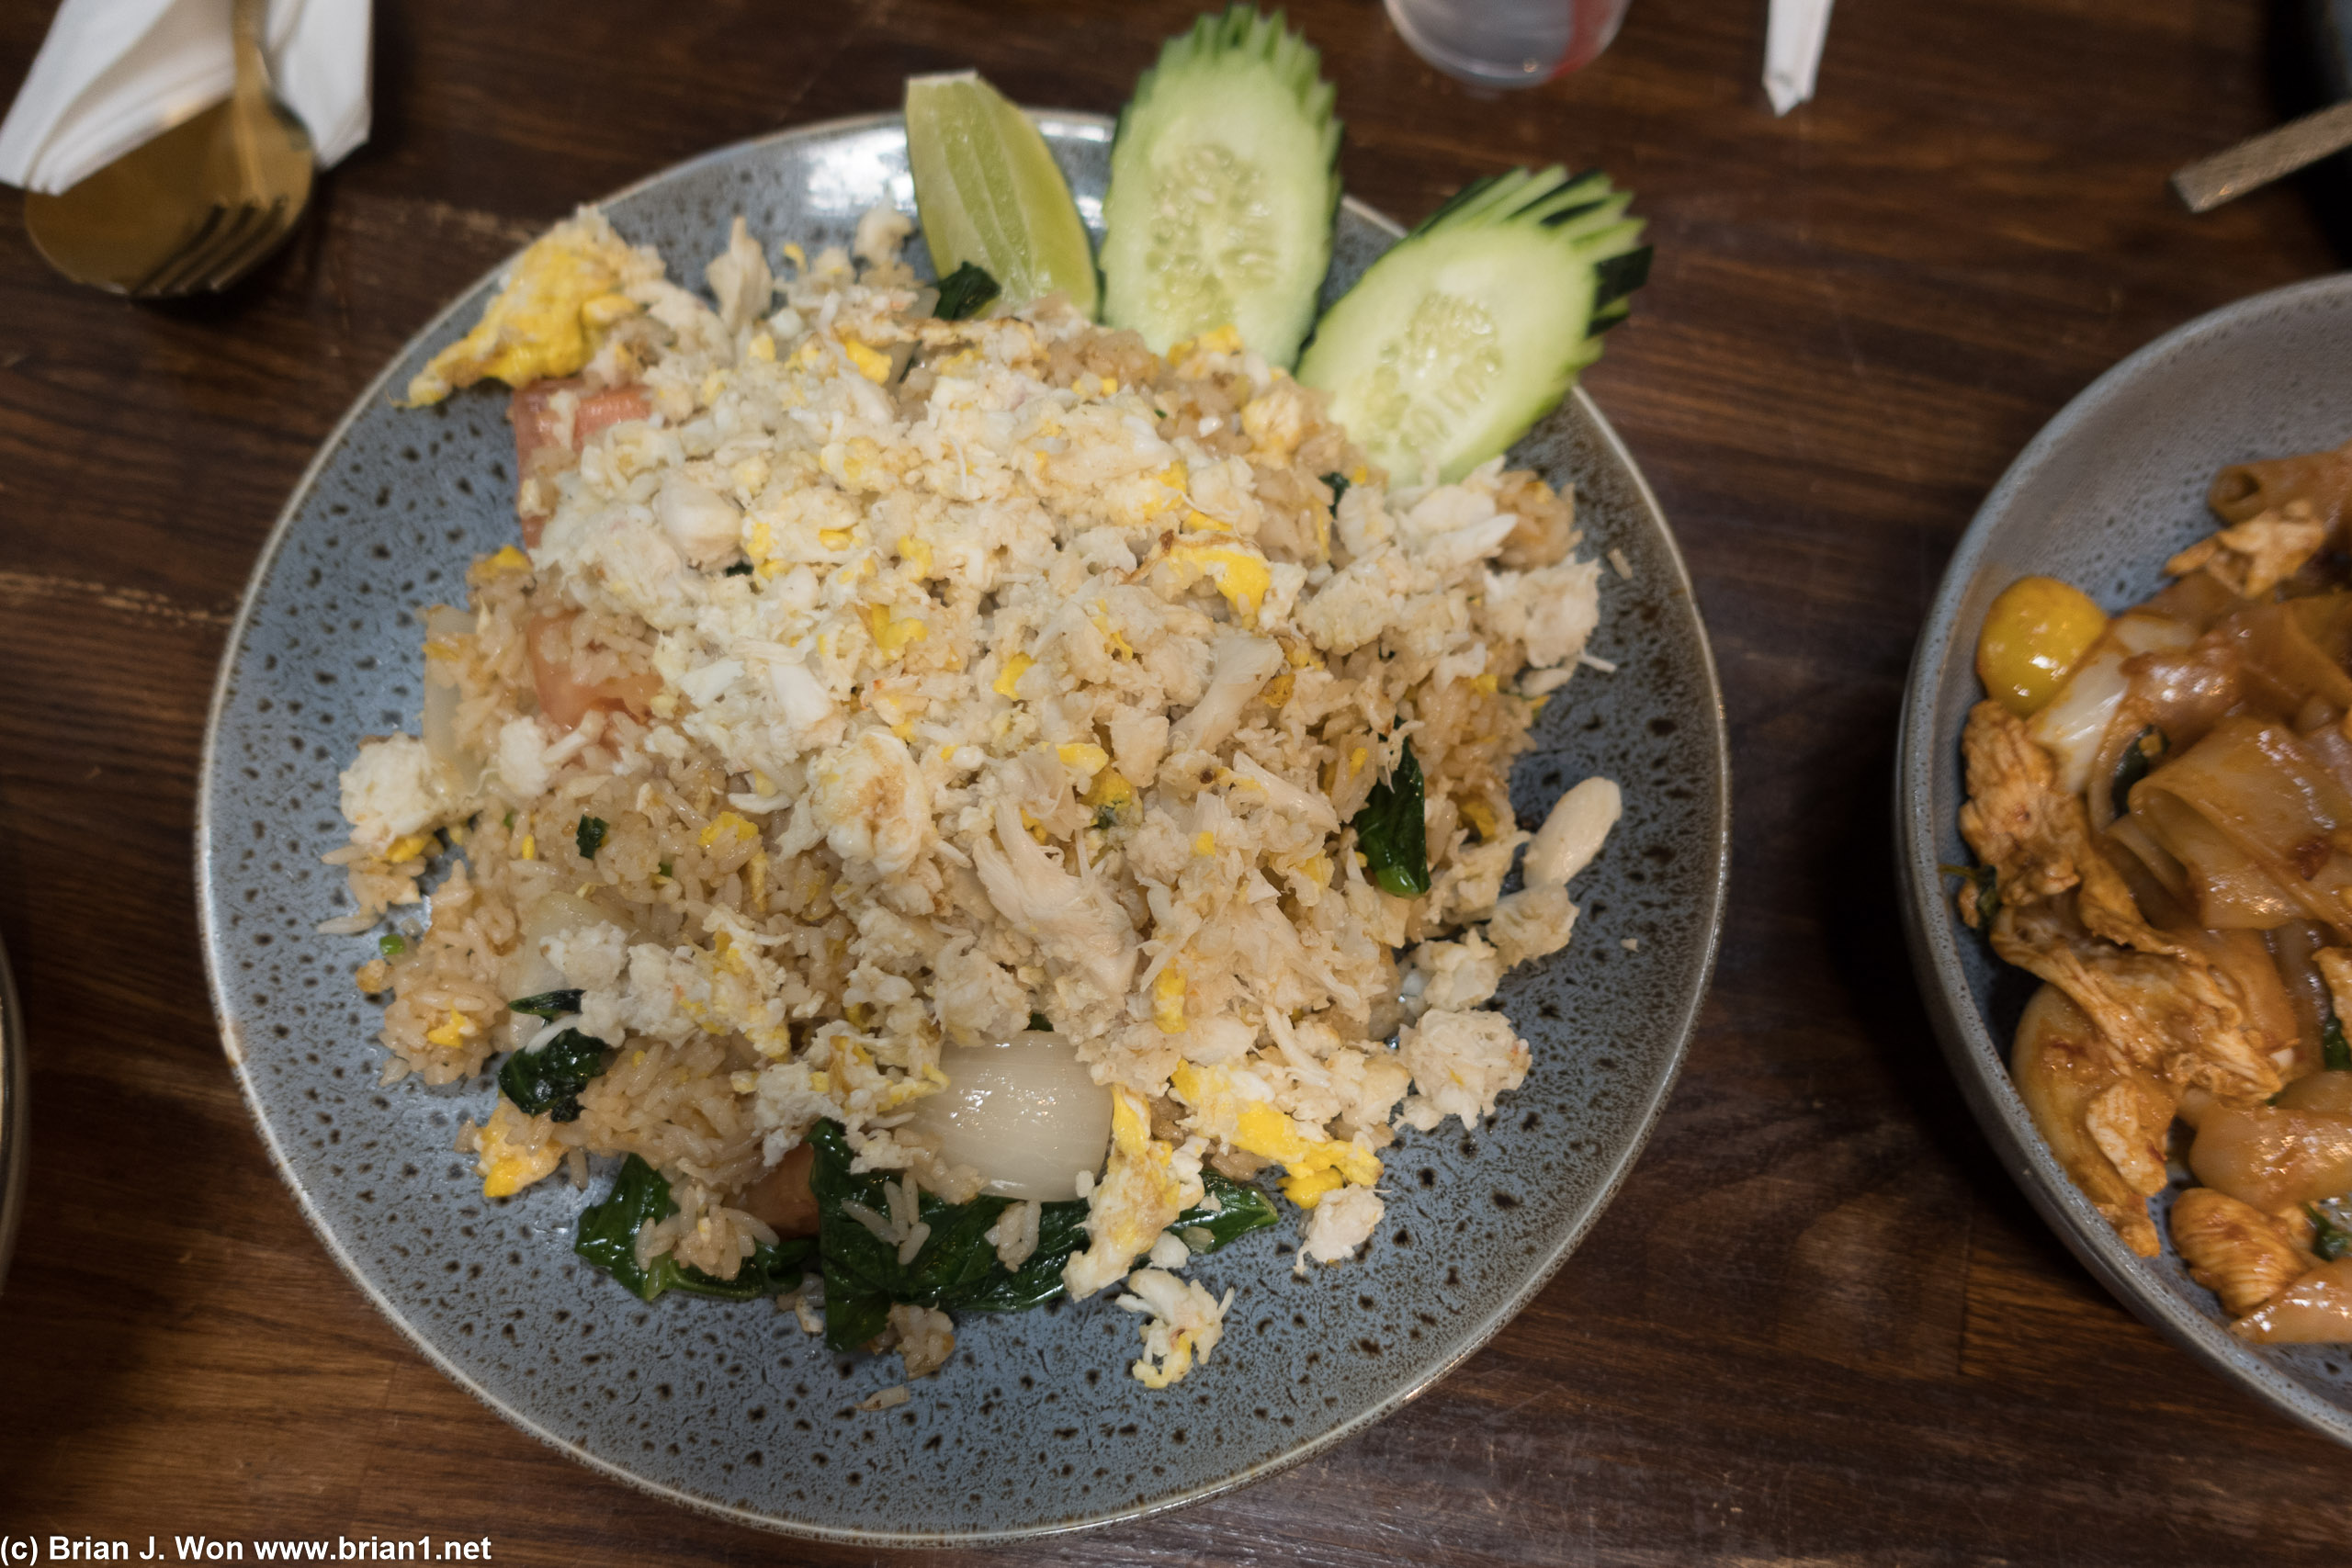 Colossal crab meat fried rice was forgettable.